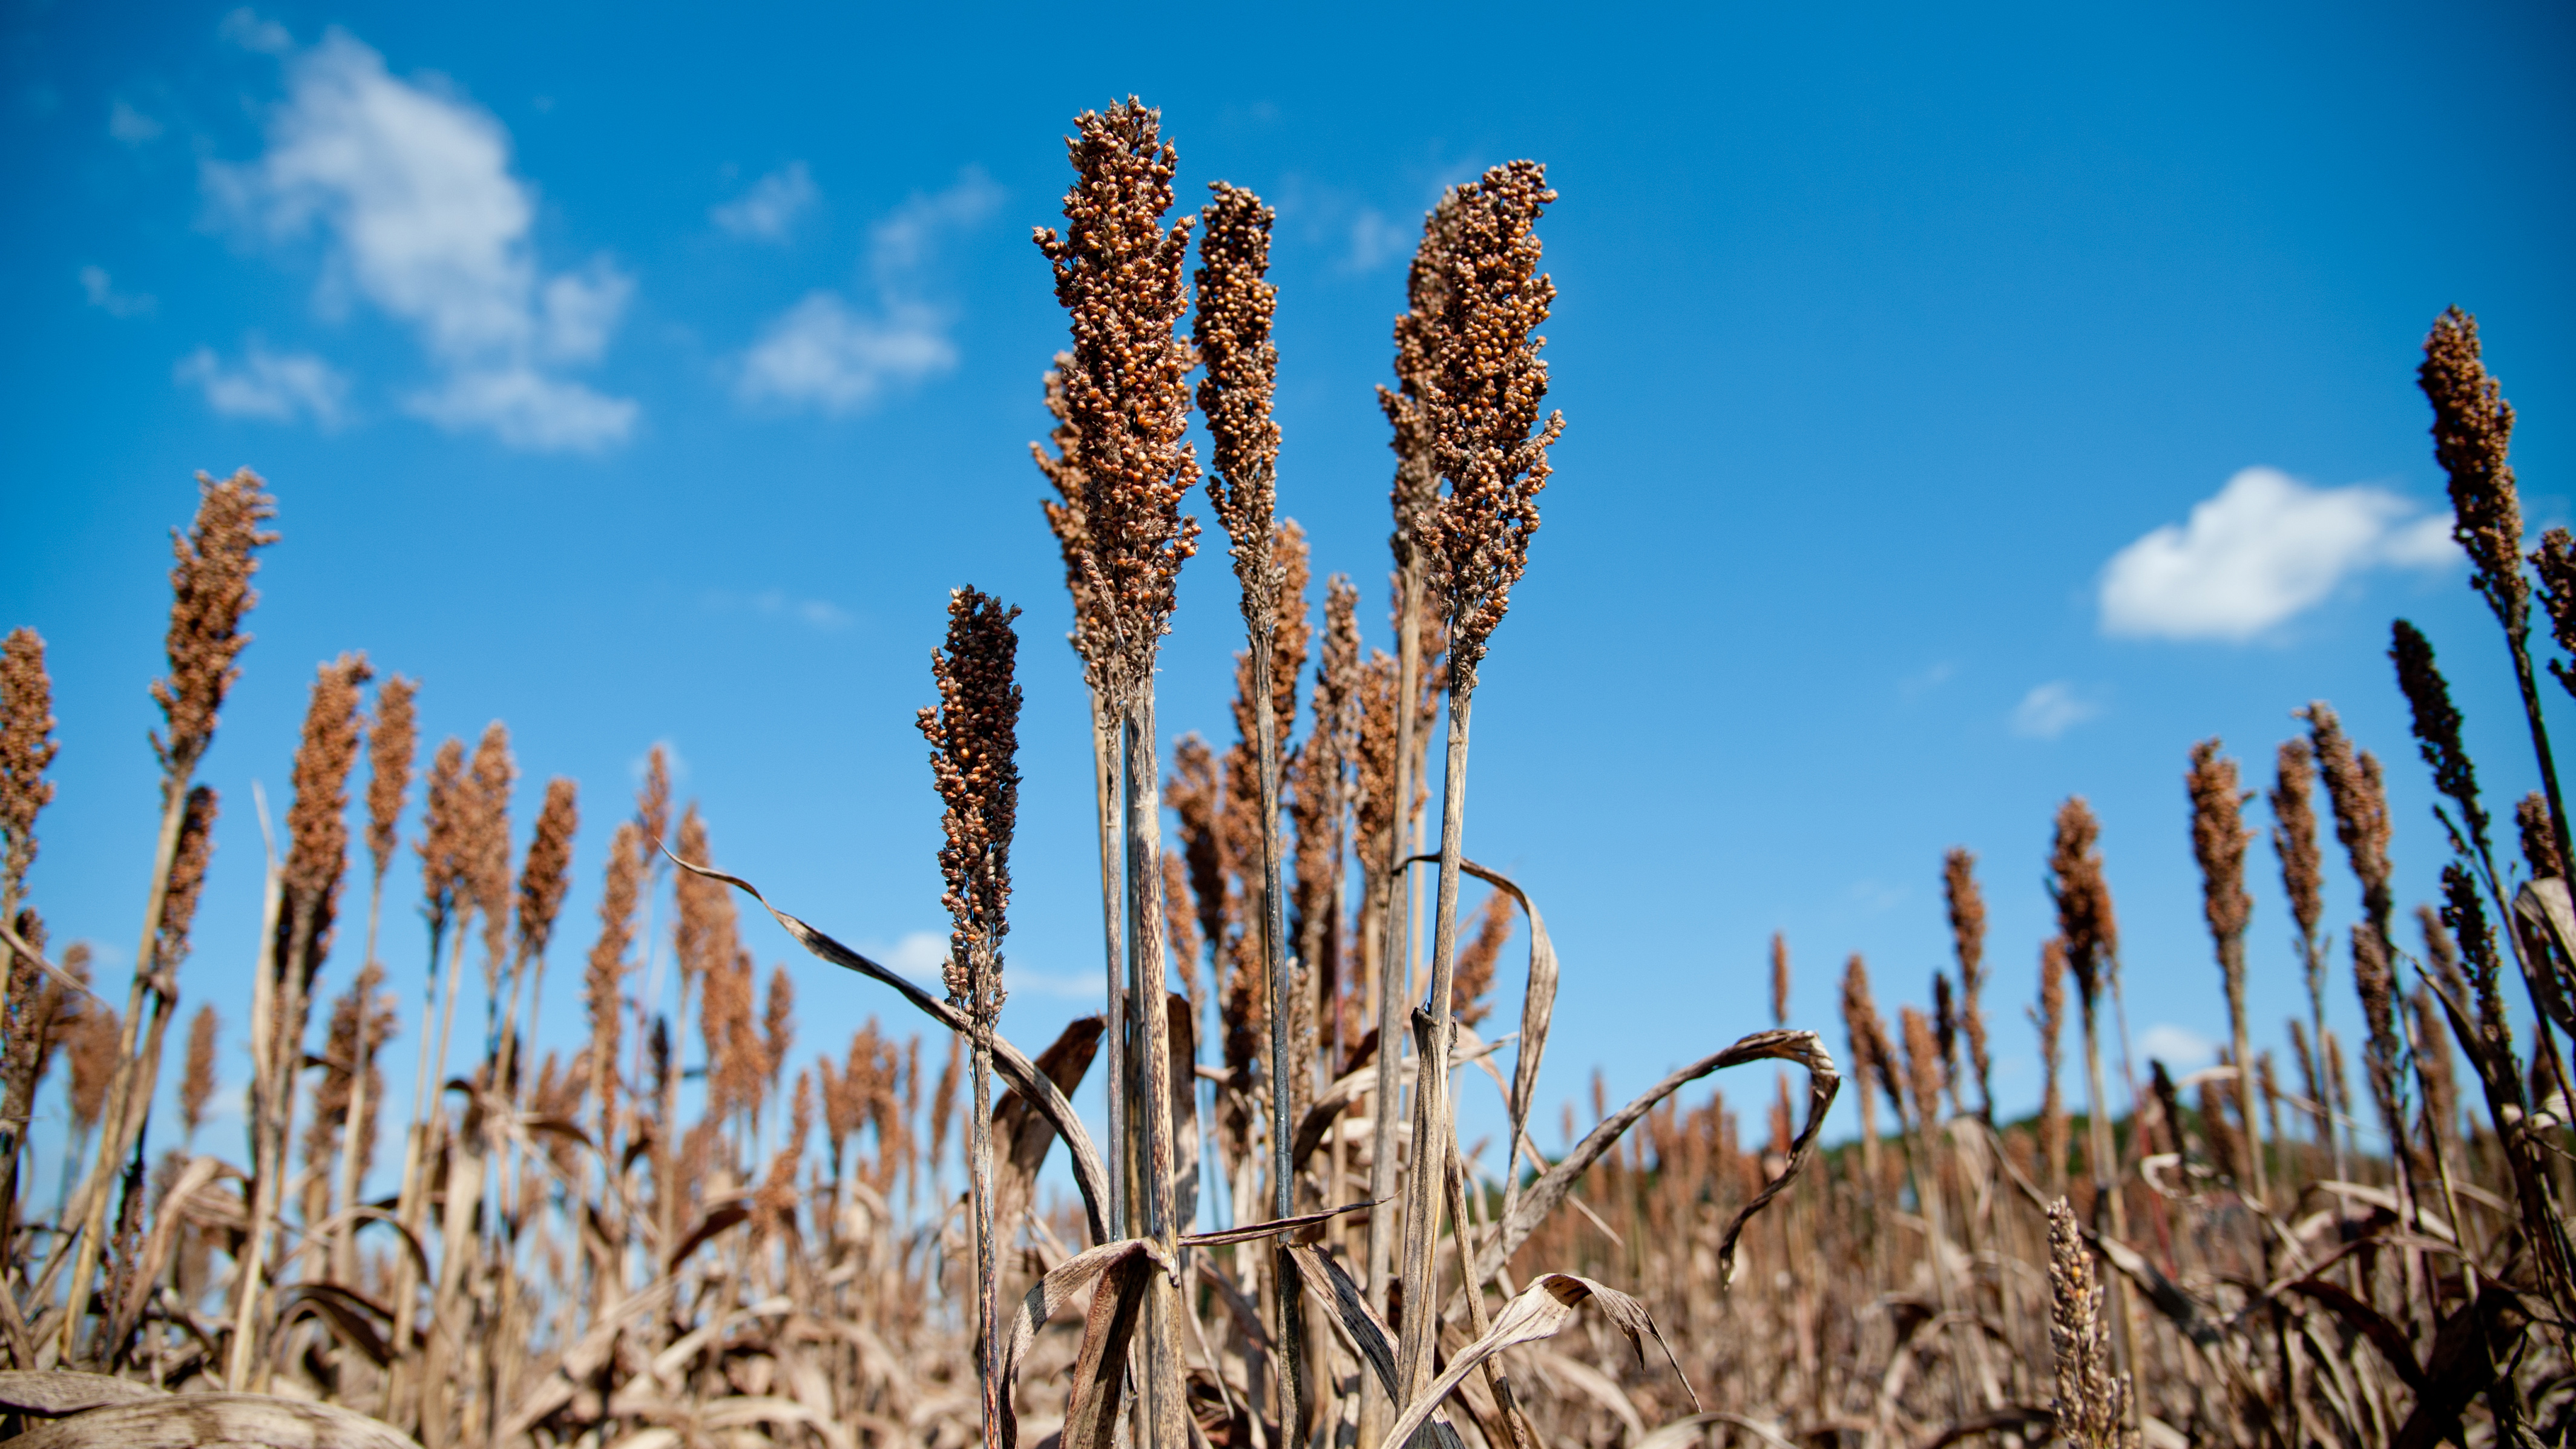 Field of sorghum ready for harvest.